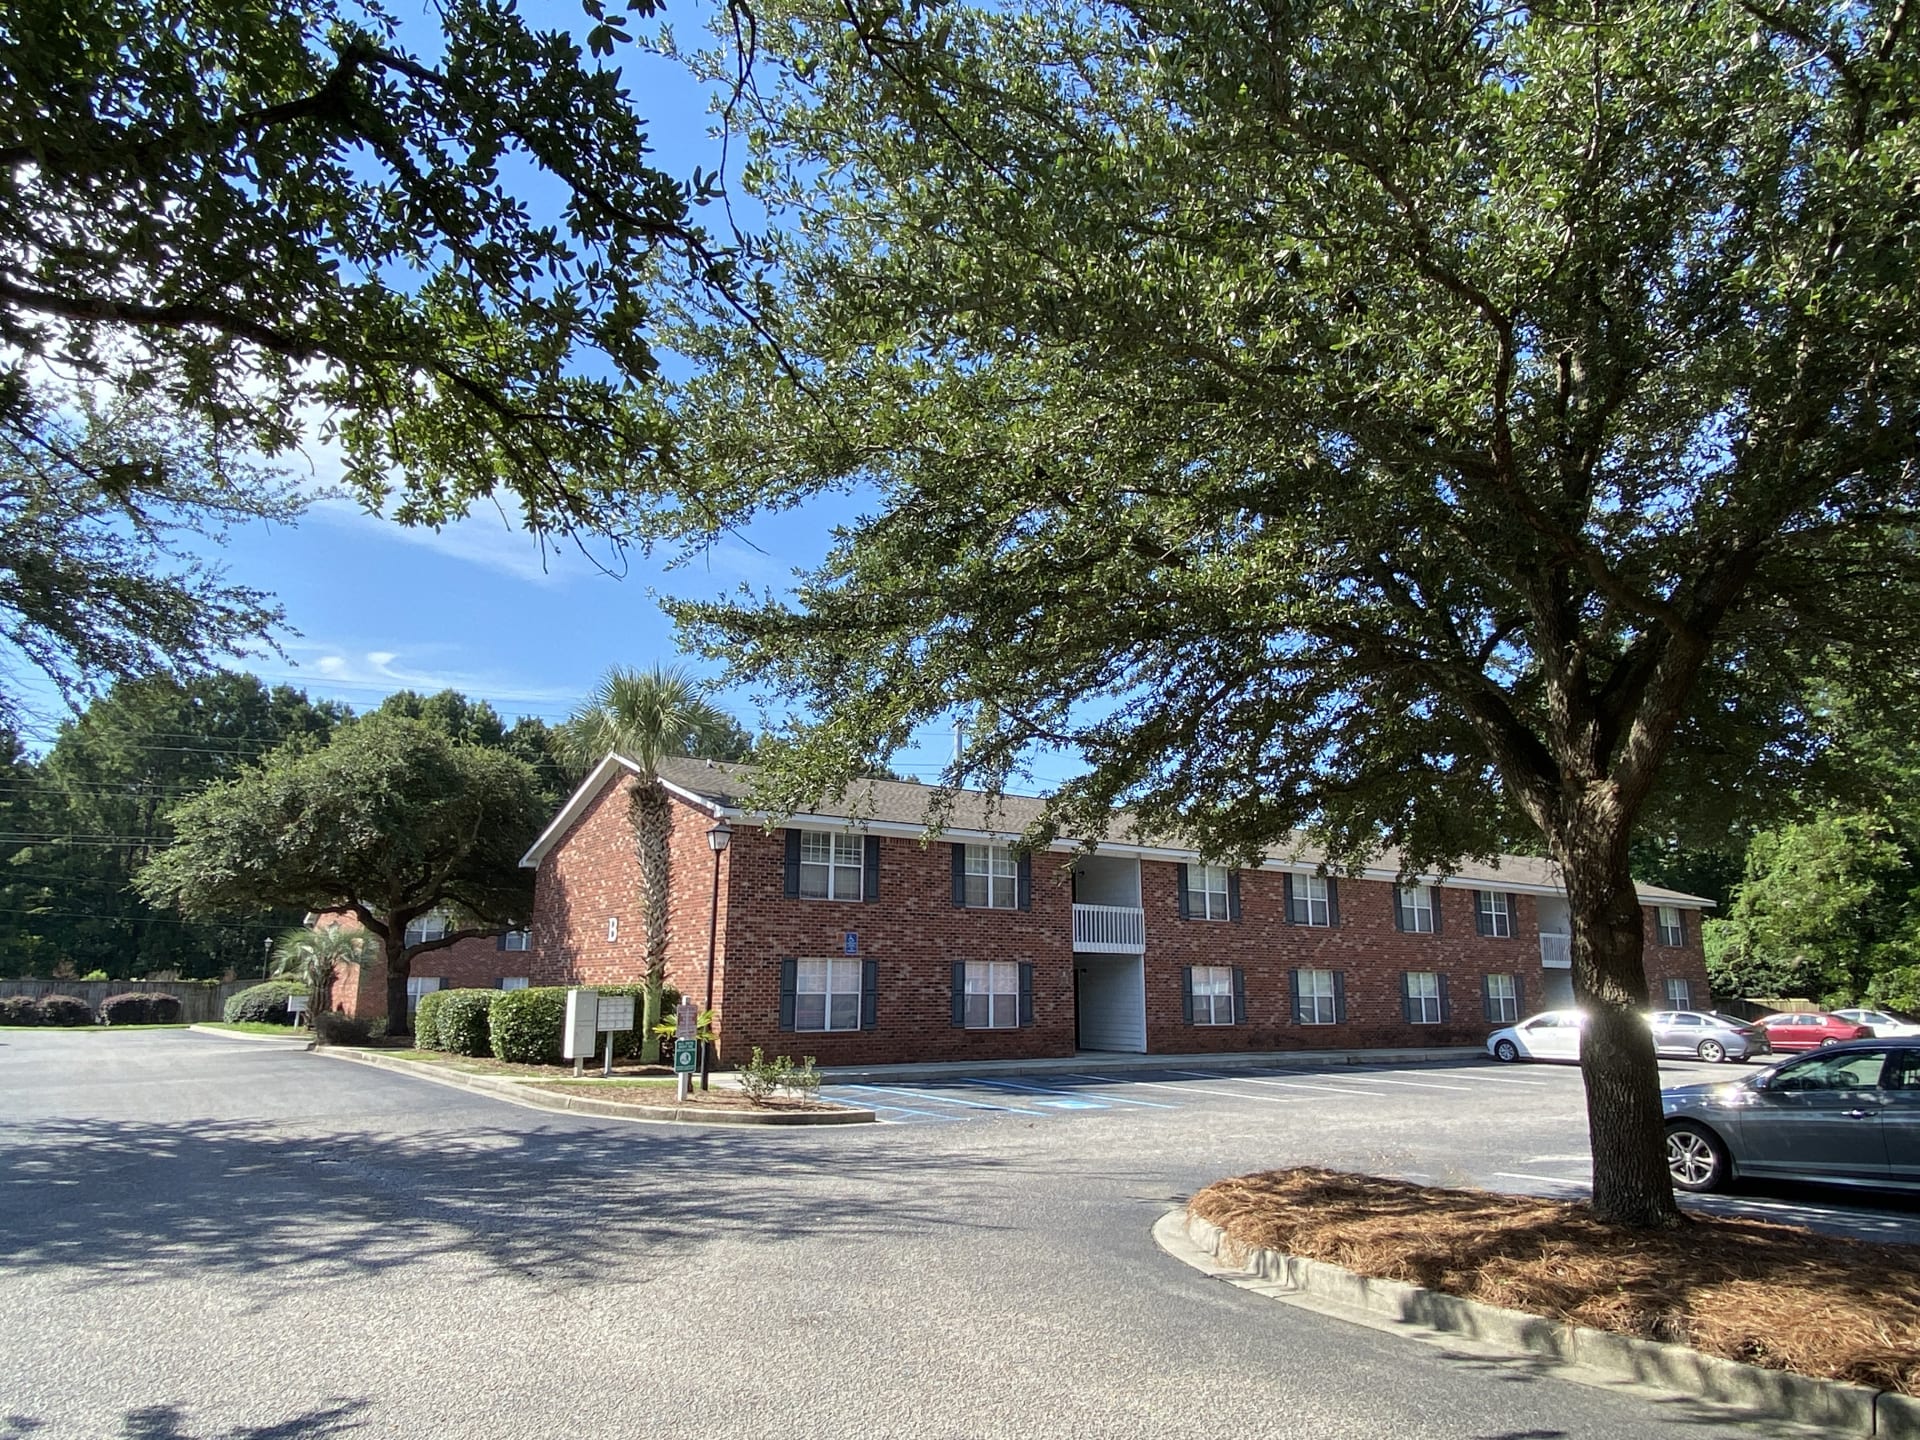 Units: 112
Submarket: North Charleston
State: South Carolina
Acquisition in June 2023